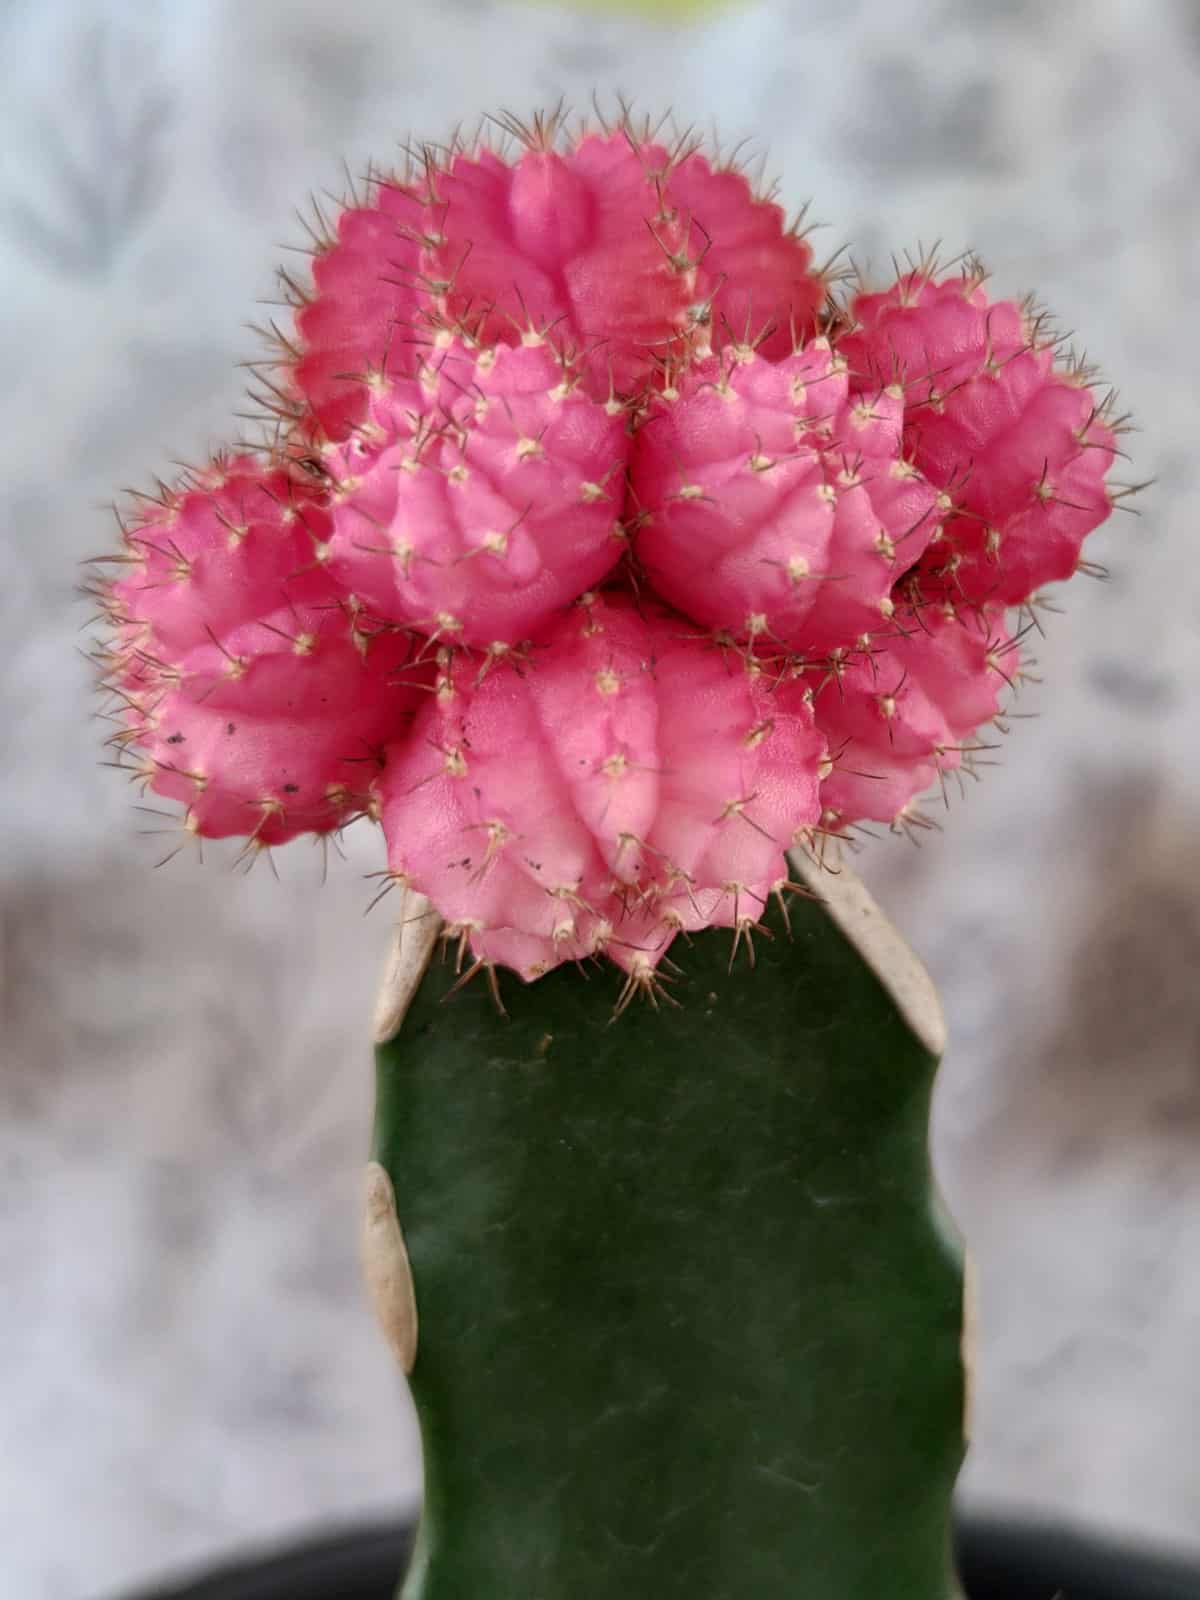 Stunning bright pink flowering Moon Cactus photographed up close